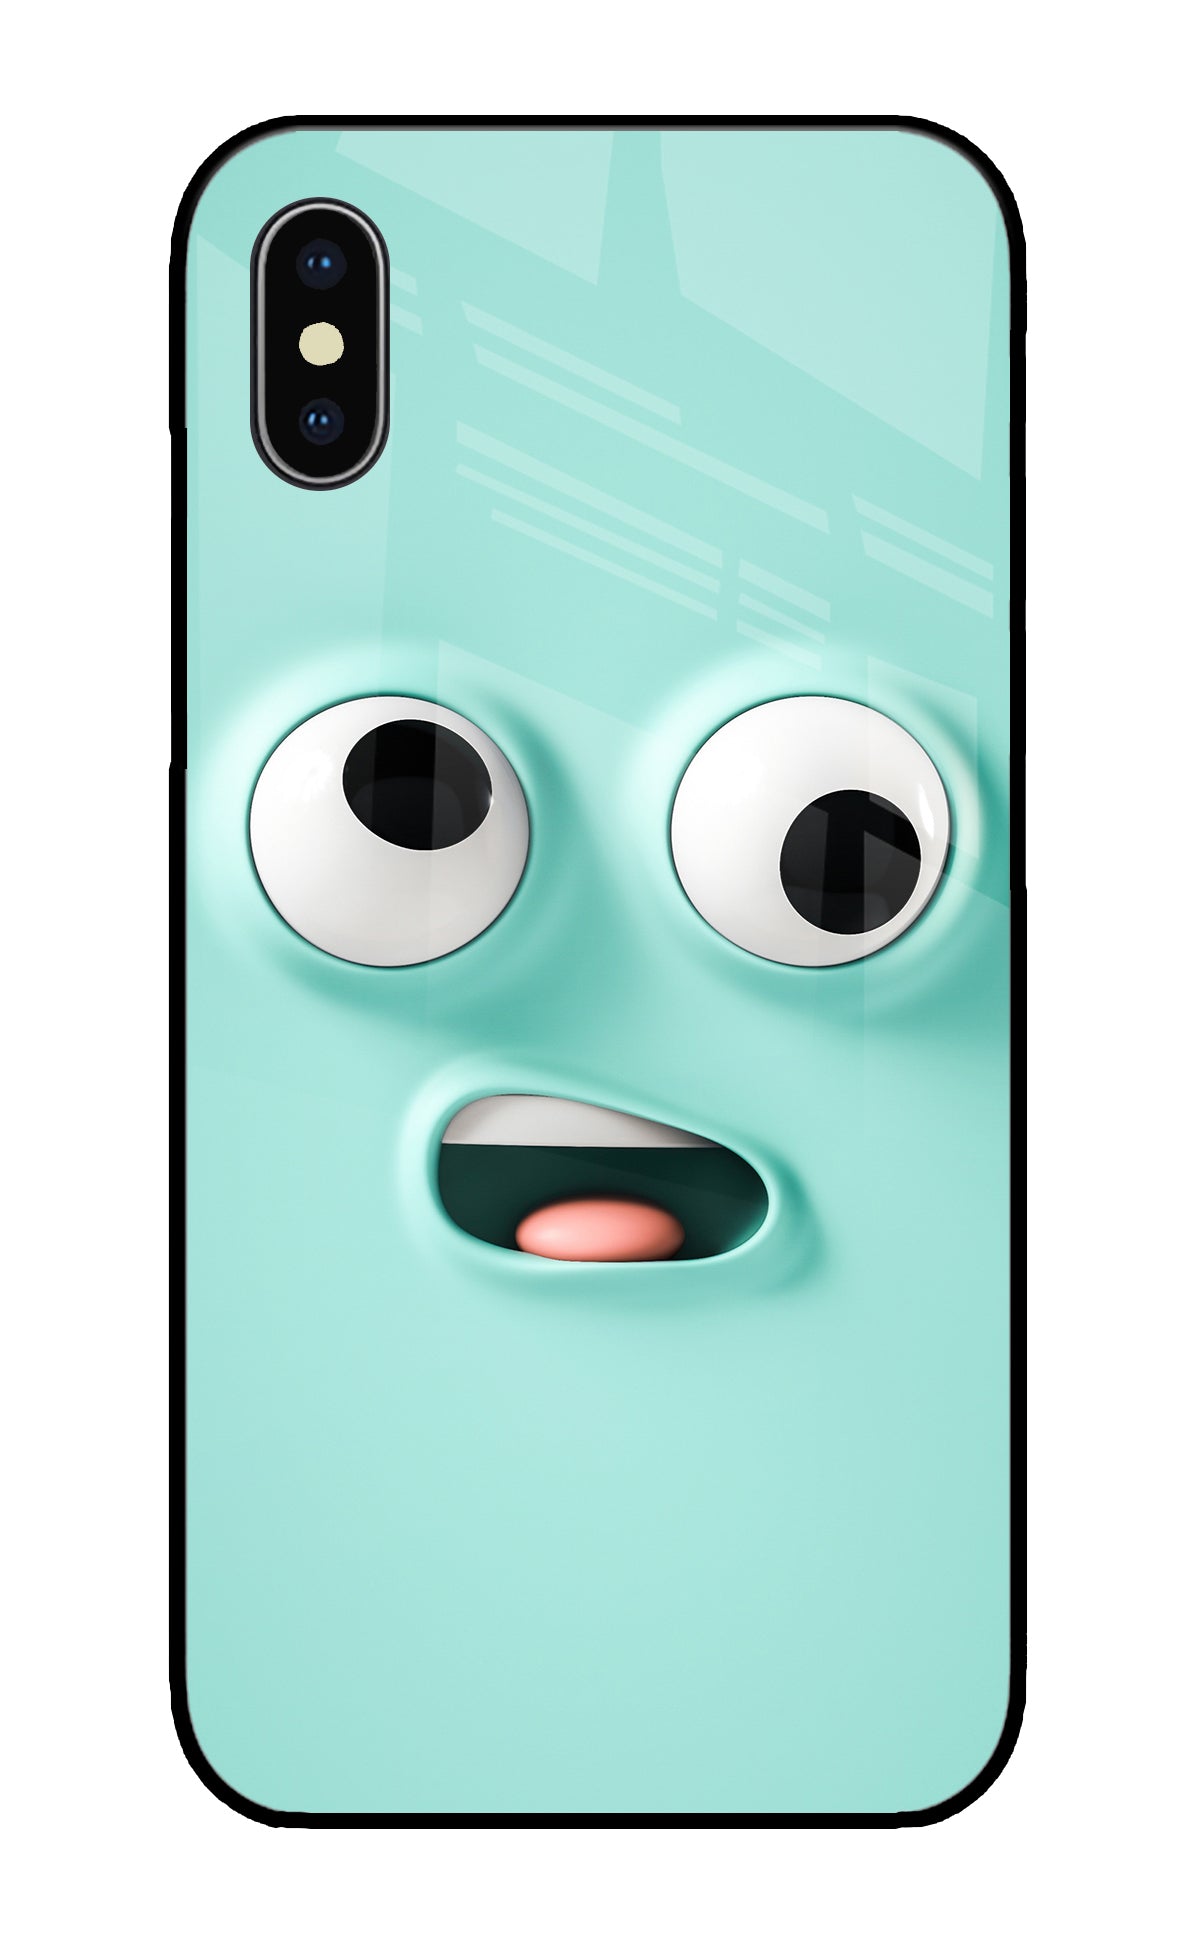 Silly Face Cartoon iPhone X Glass Cover